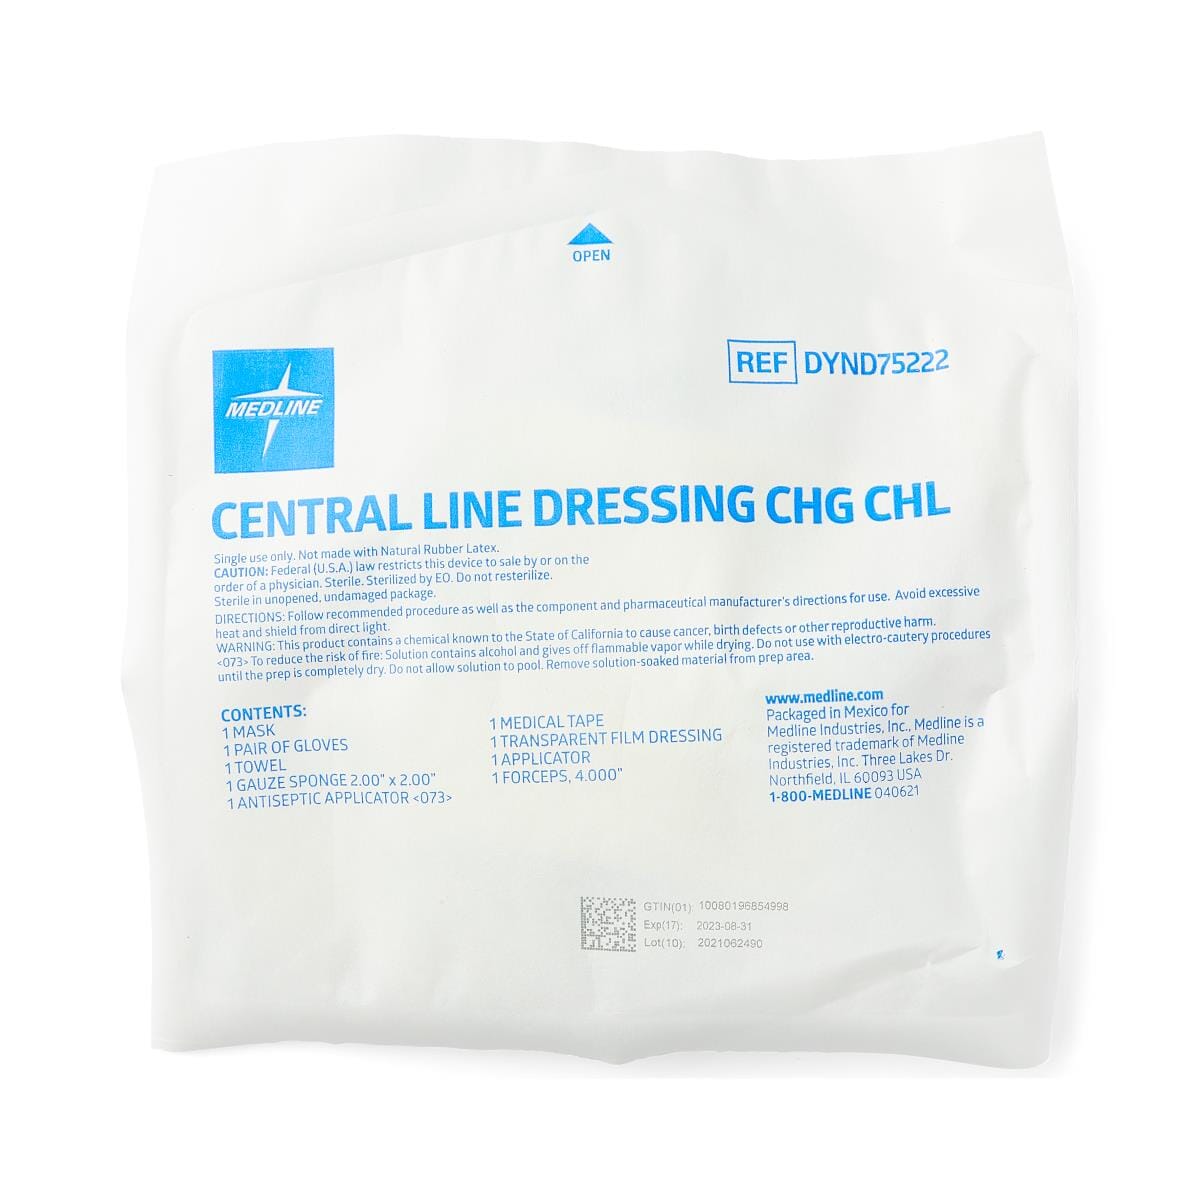 Central Line Dressing Trays with CHG and ChloraPrep